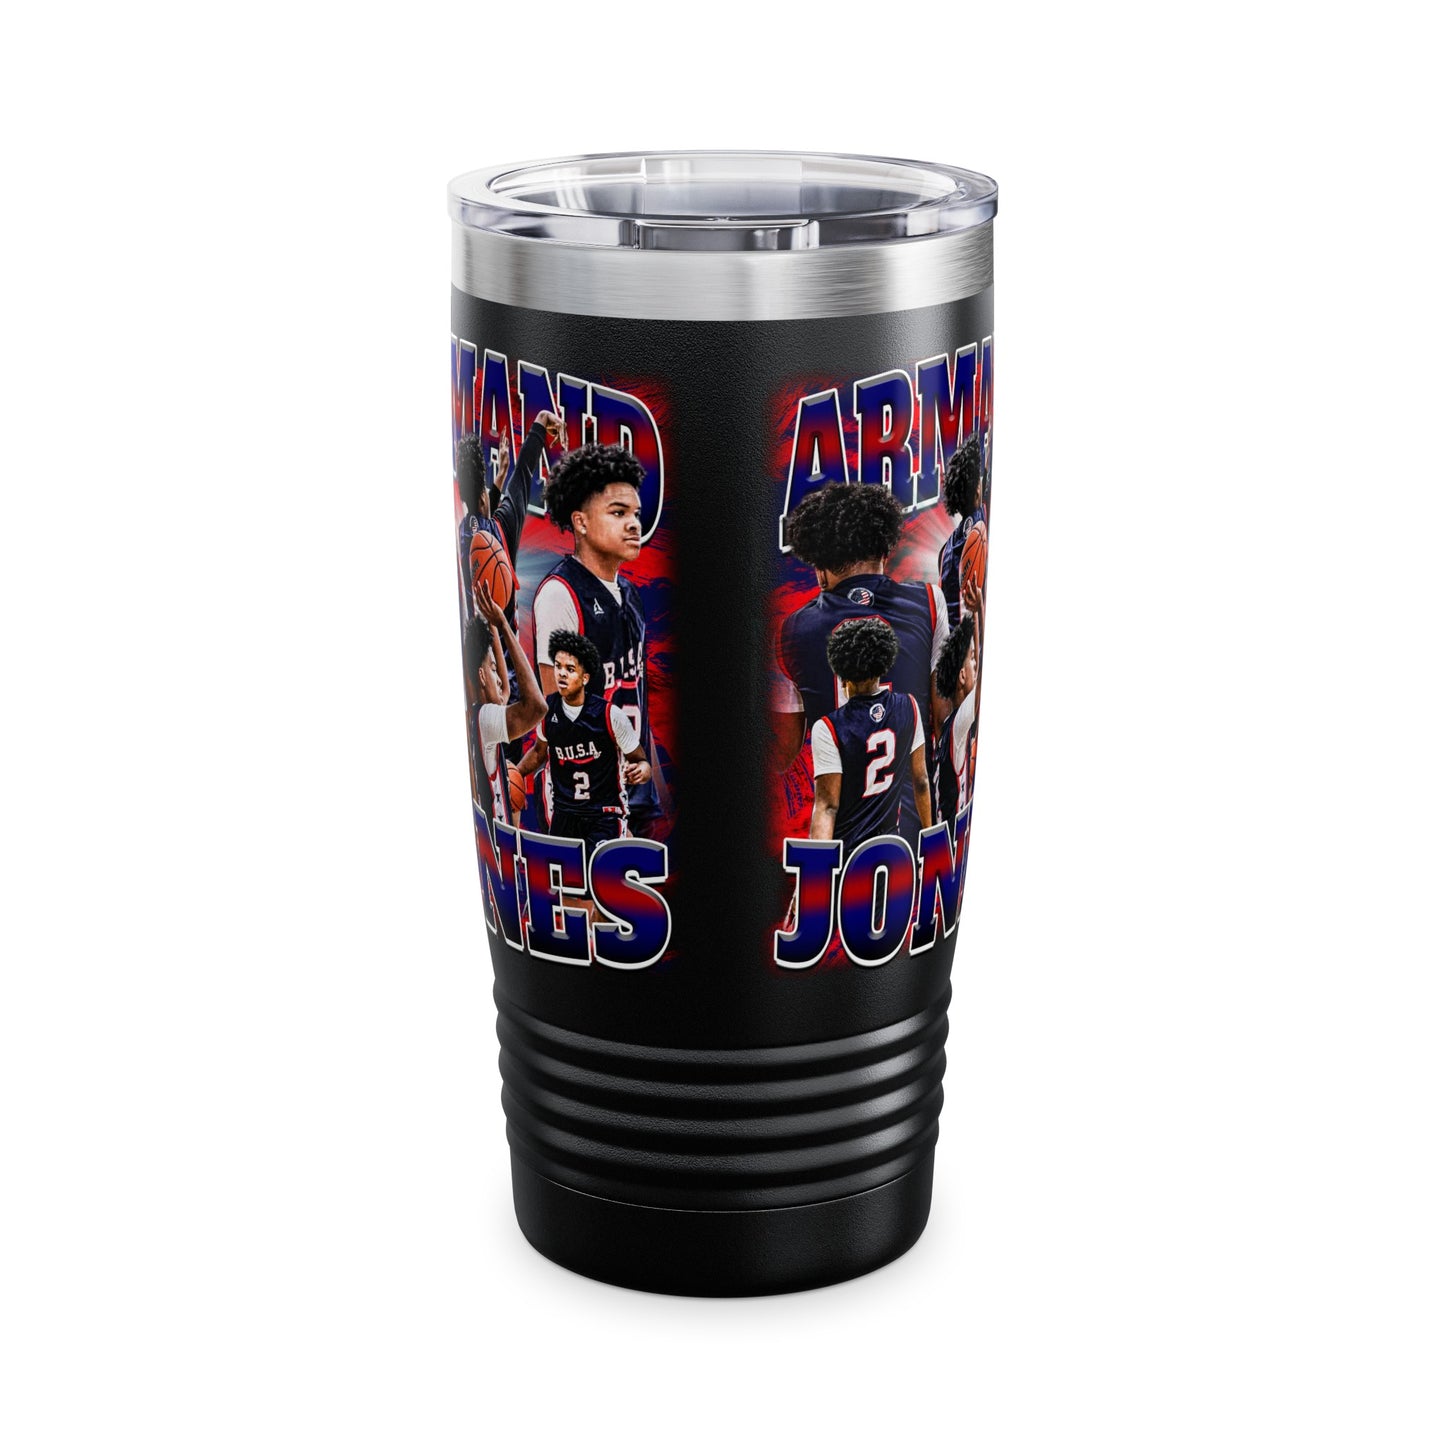 Armand Jones Stainless Steal Tumbler